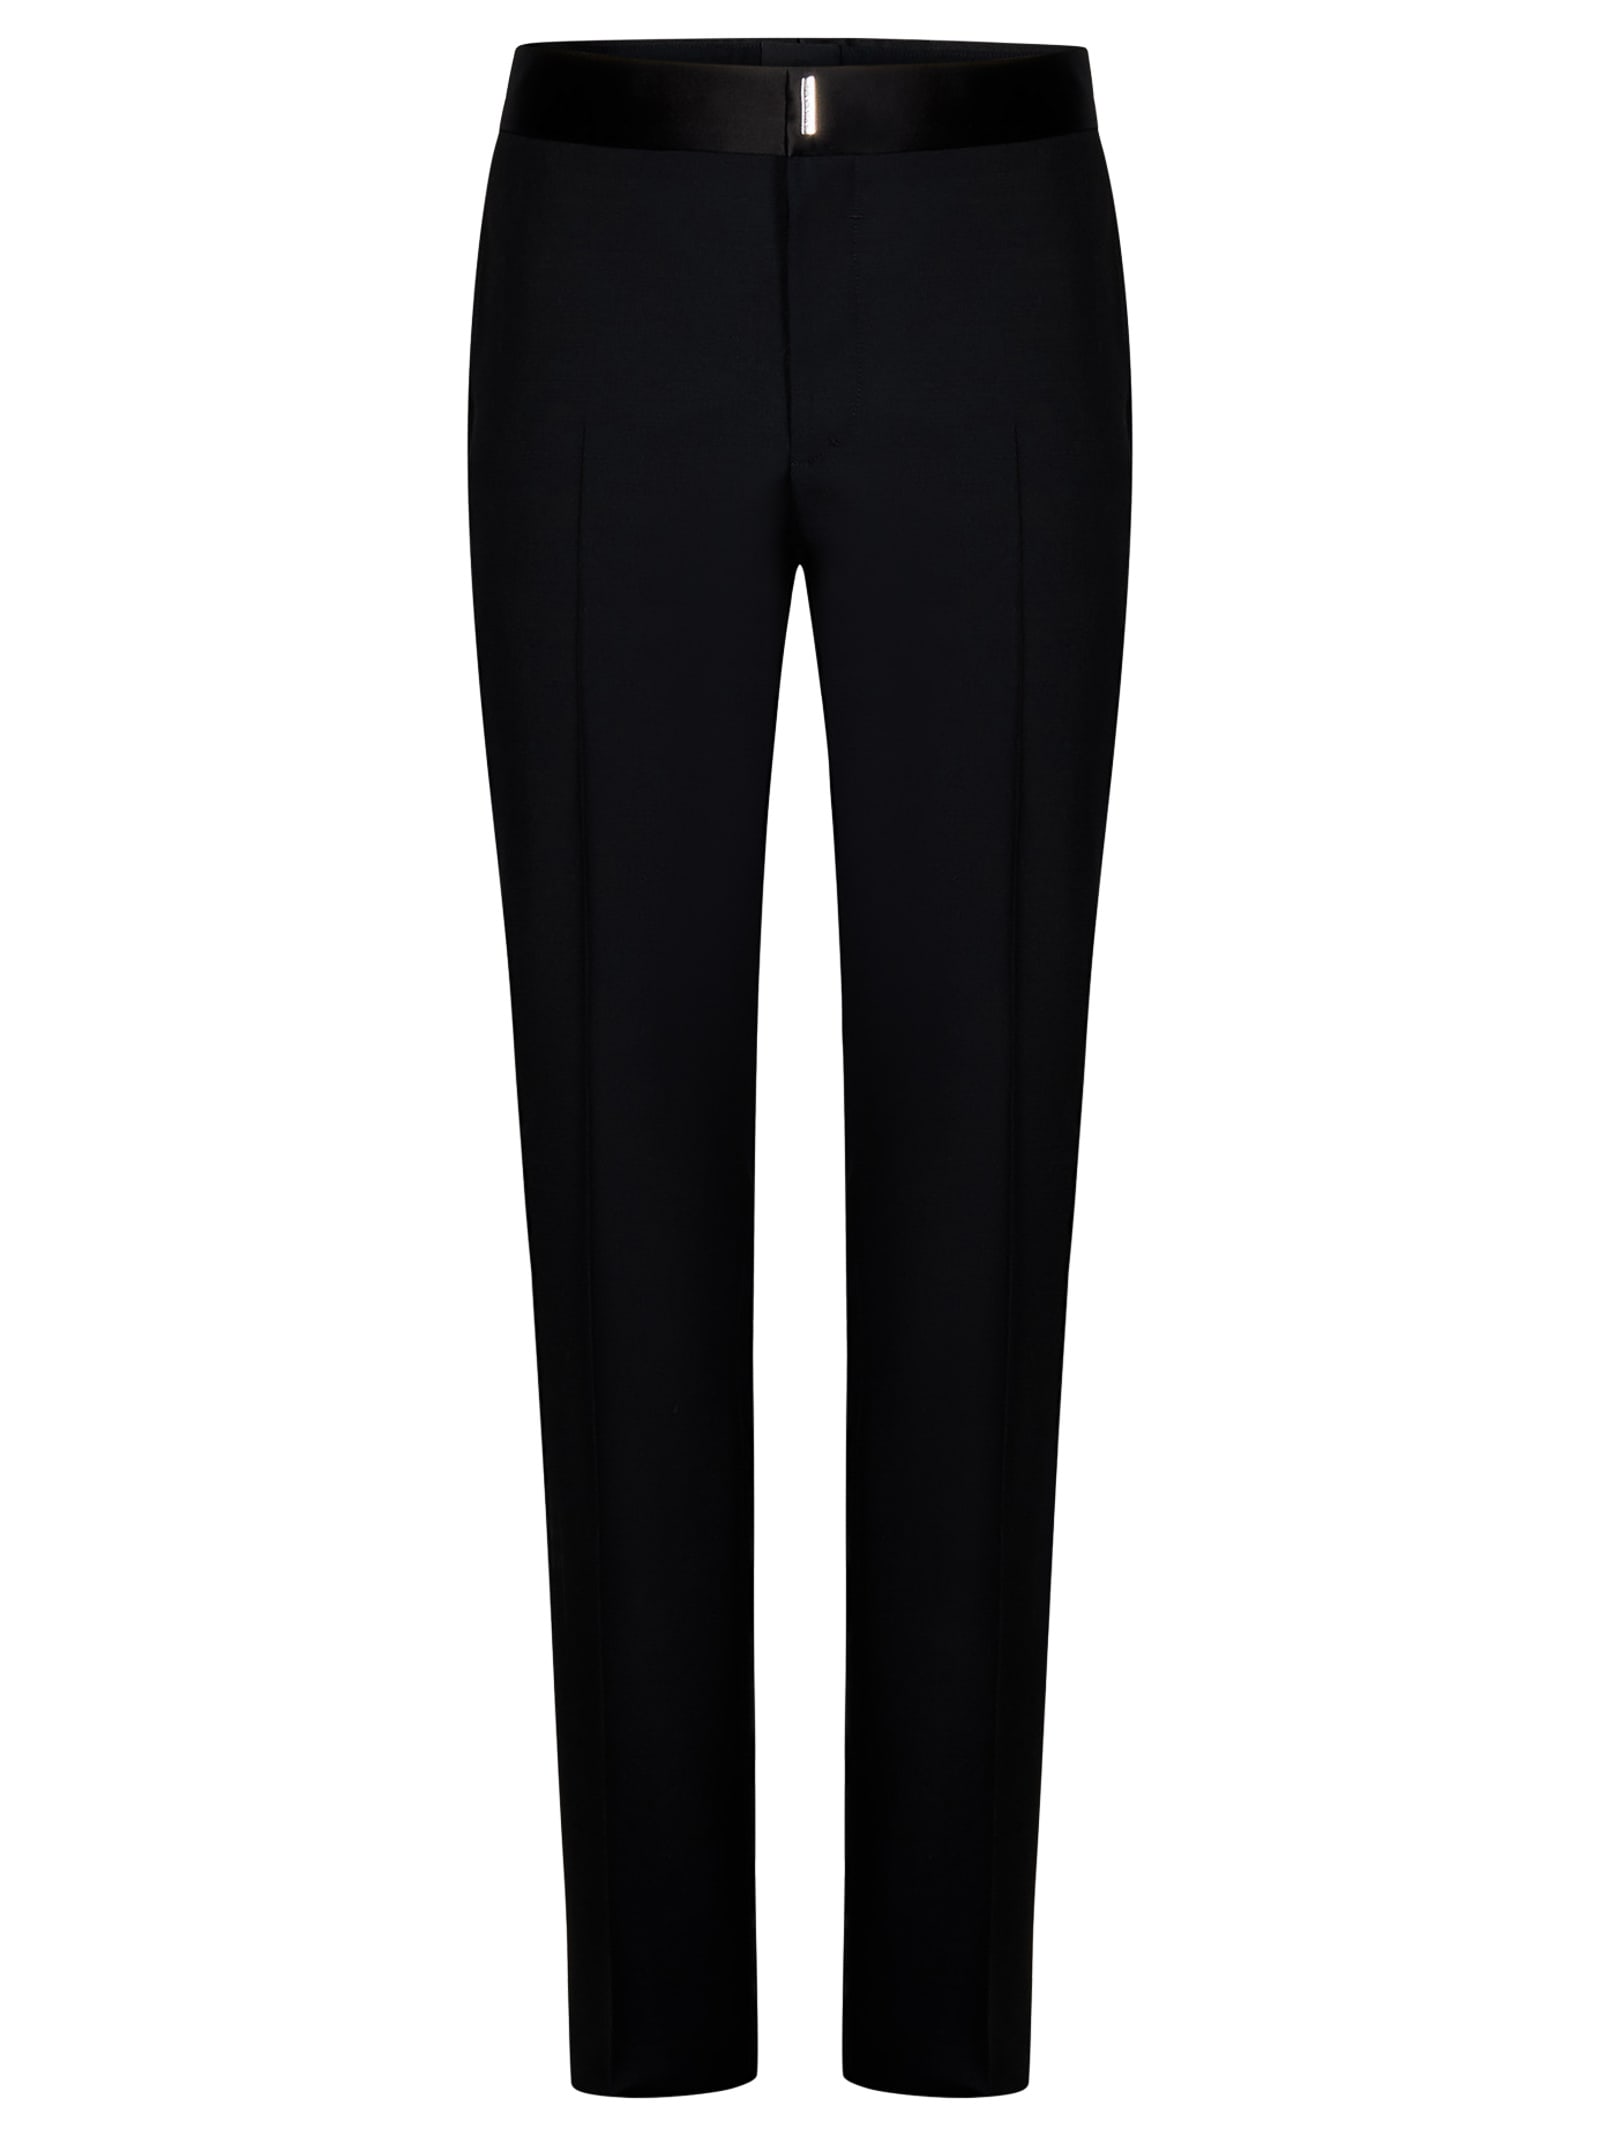 GIVENCHY PANTS IN BLACK WOOL